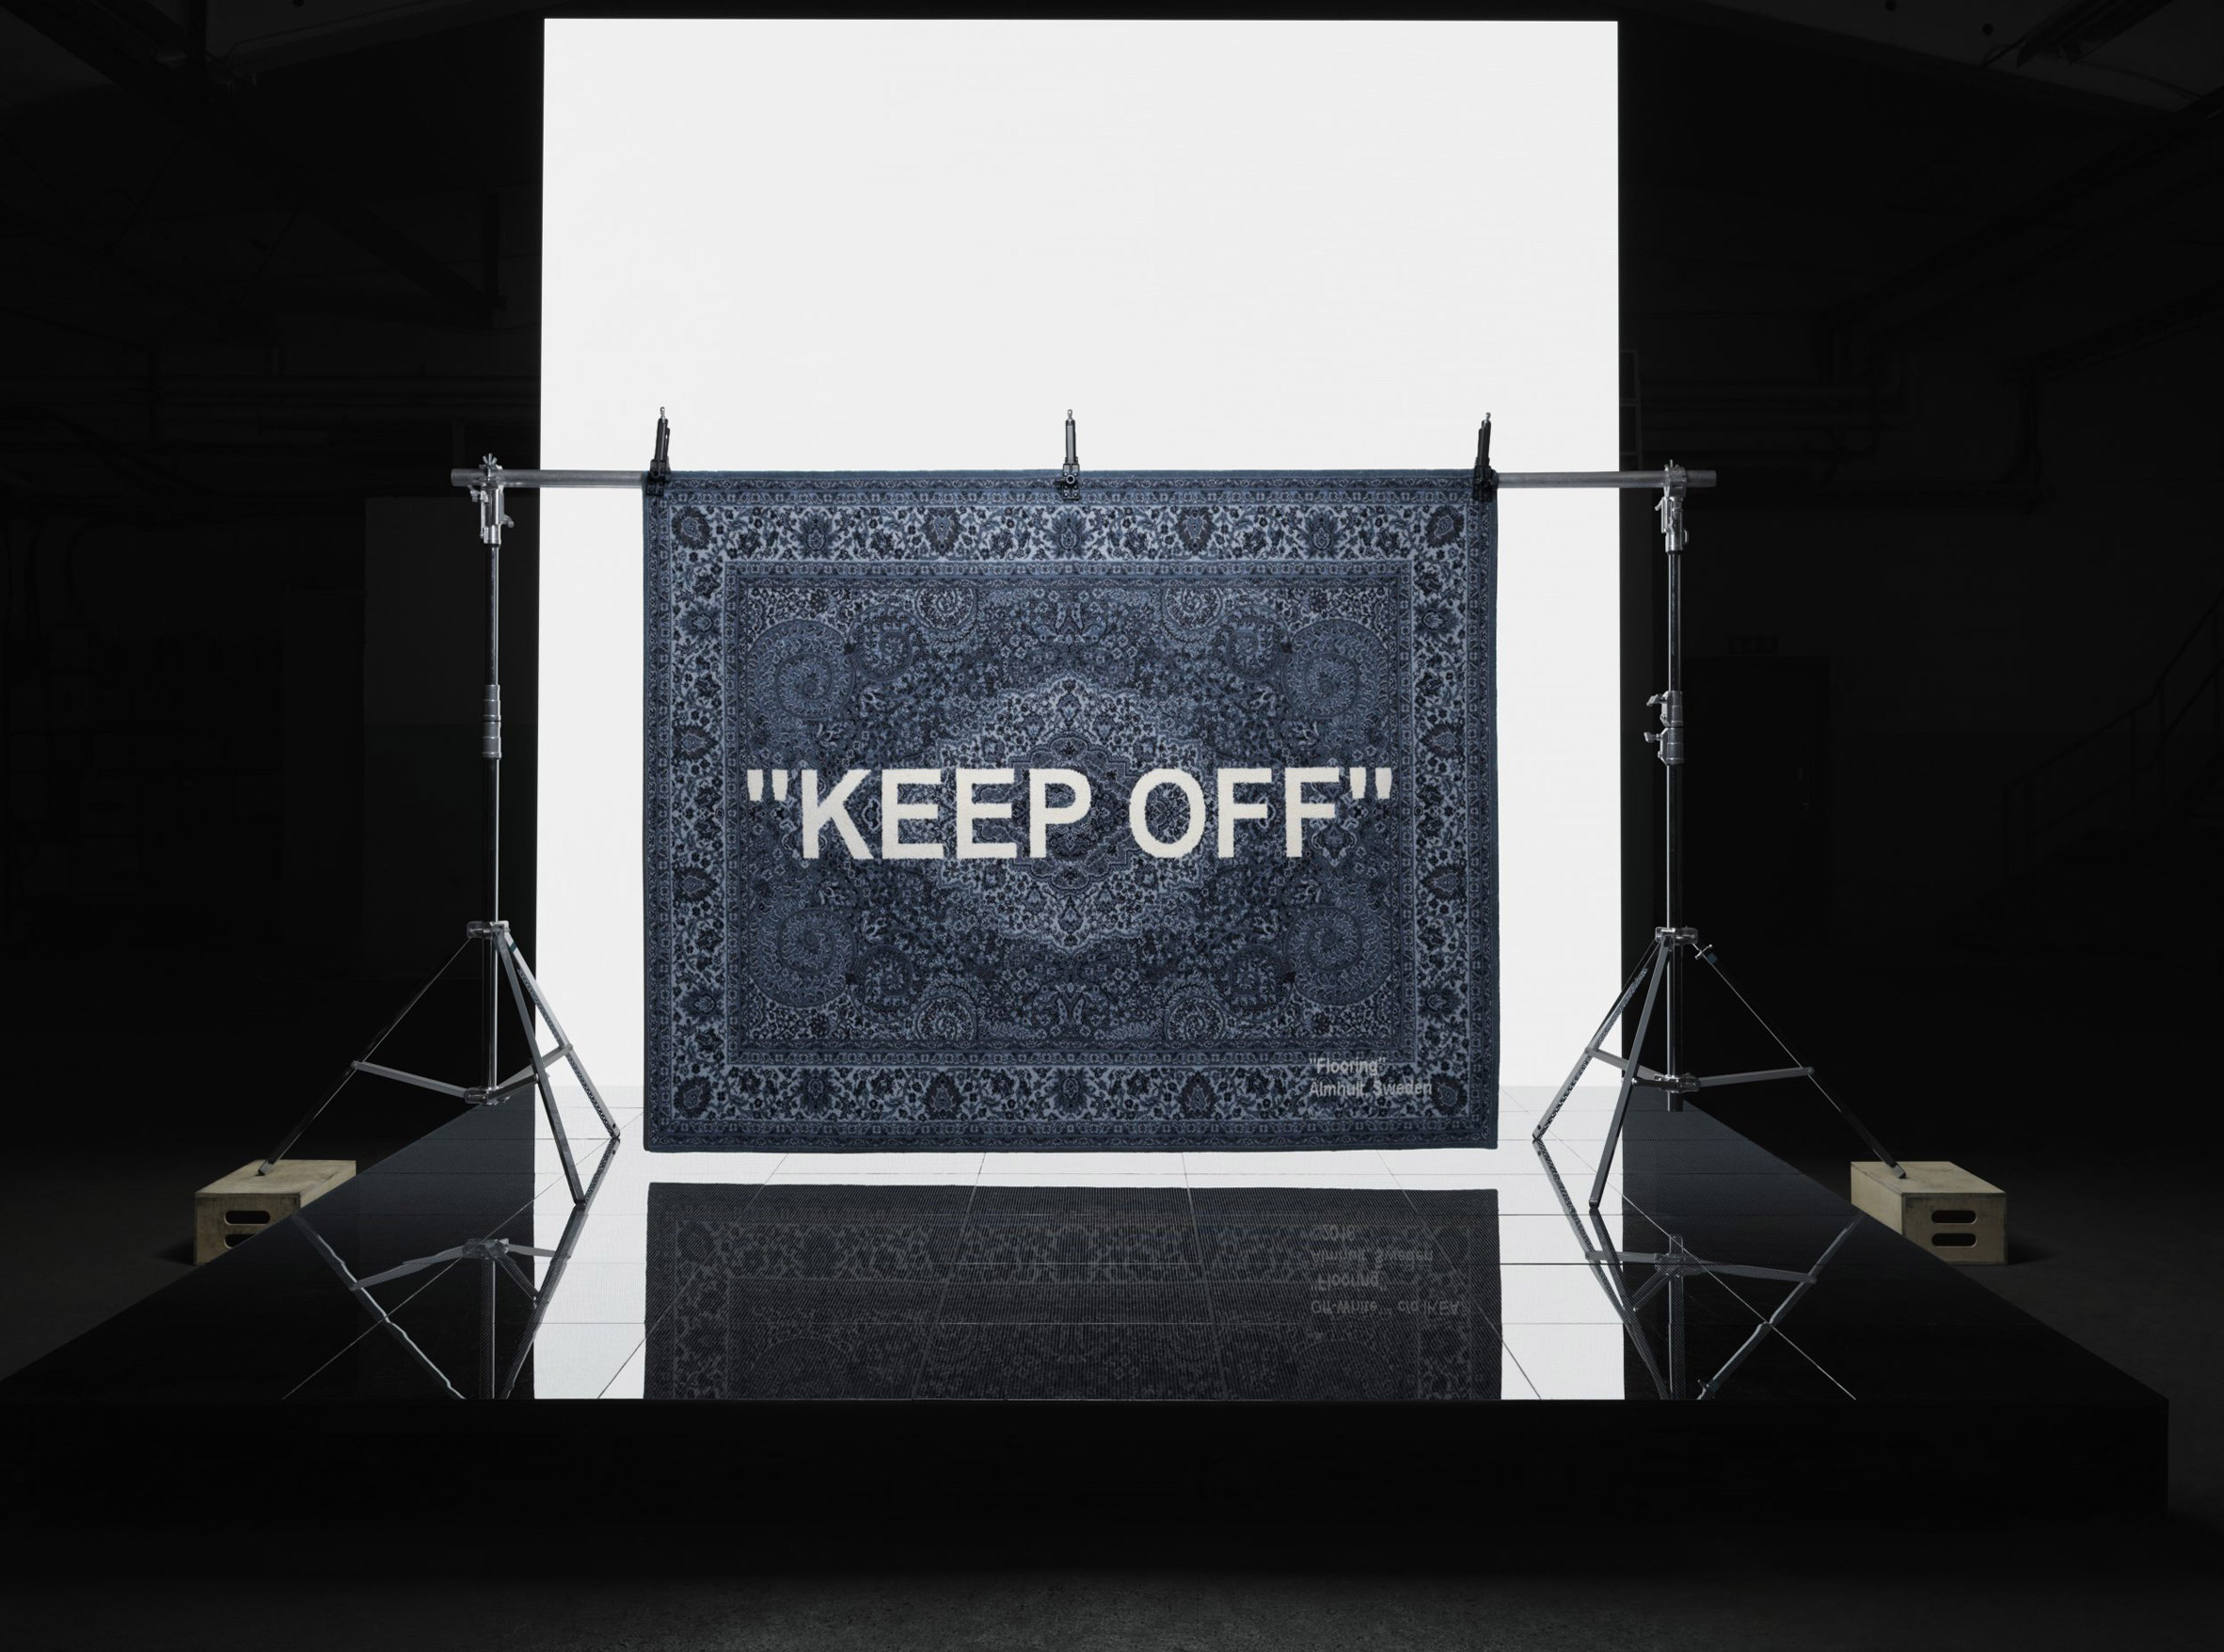 Four highly-covetable rug designs from Virgil Abloh's Ikea